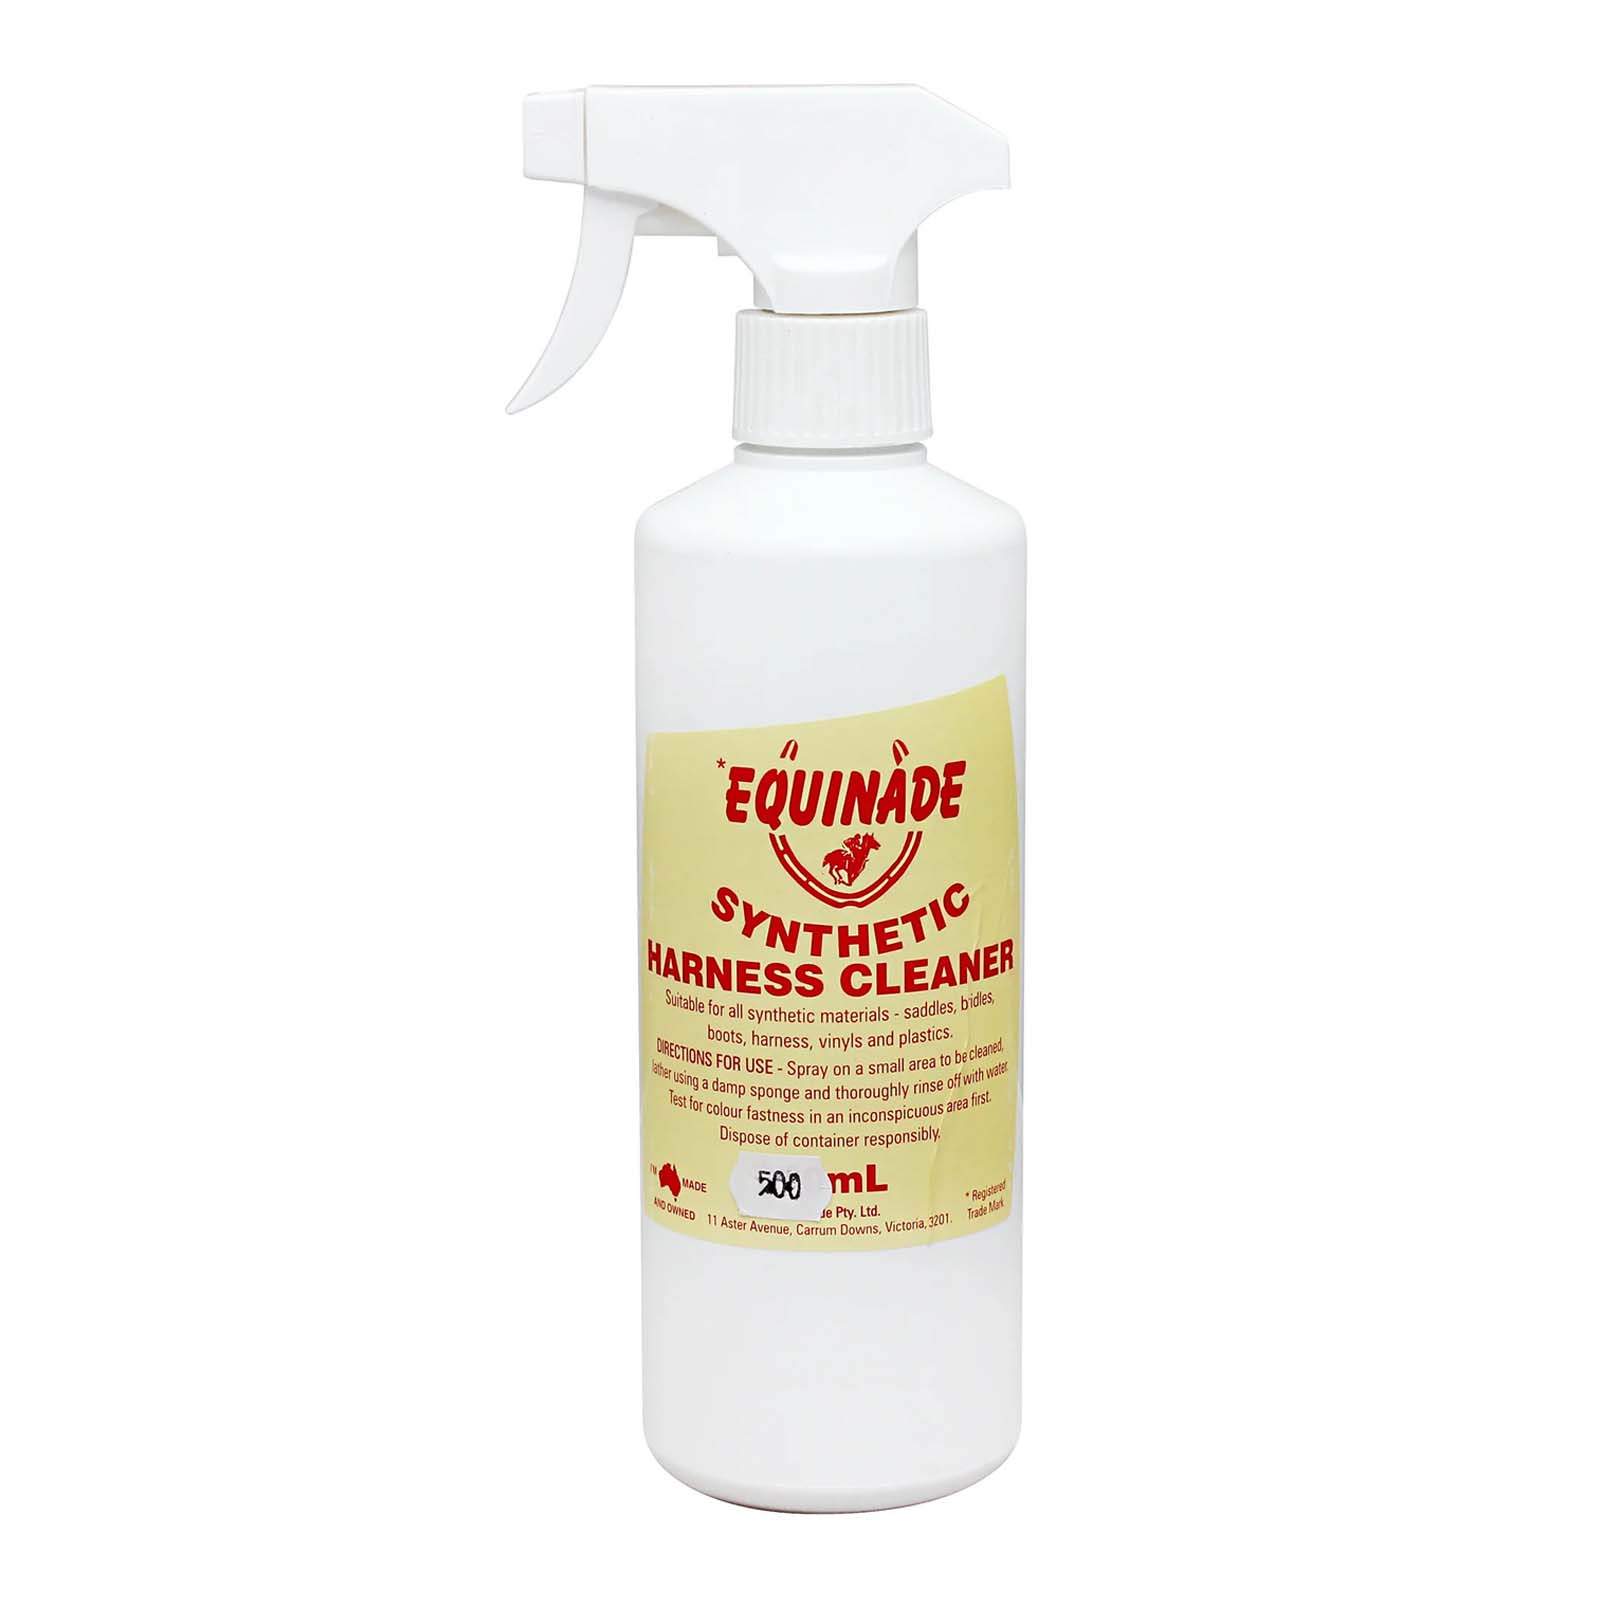 Equinade Synthetic Harness Cleaner